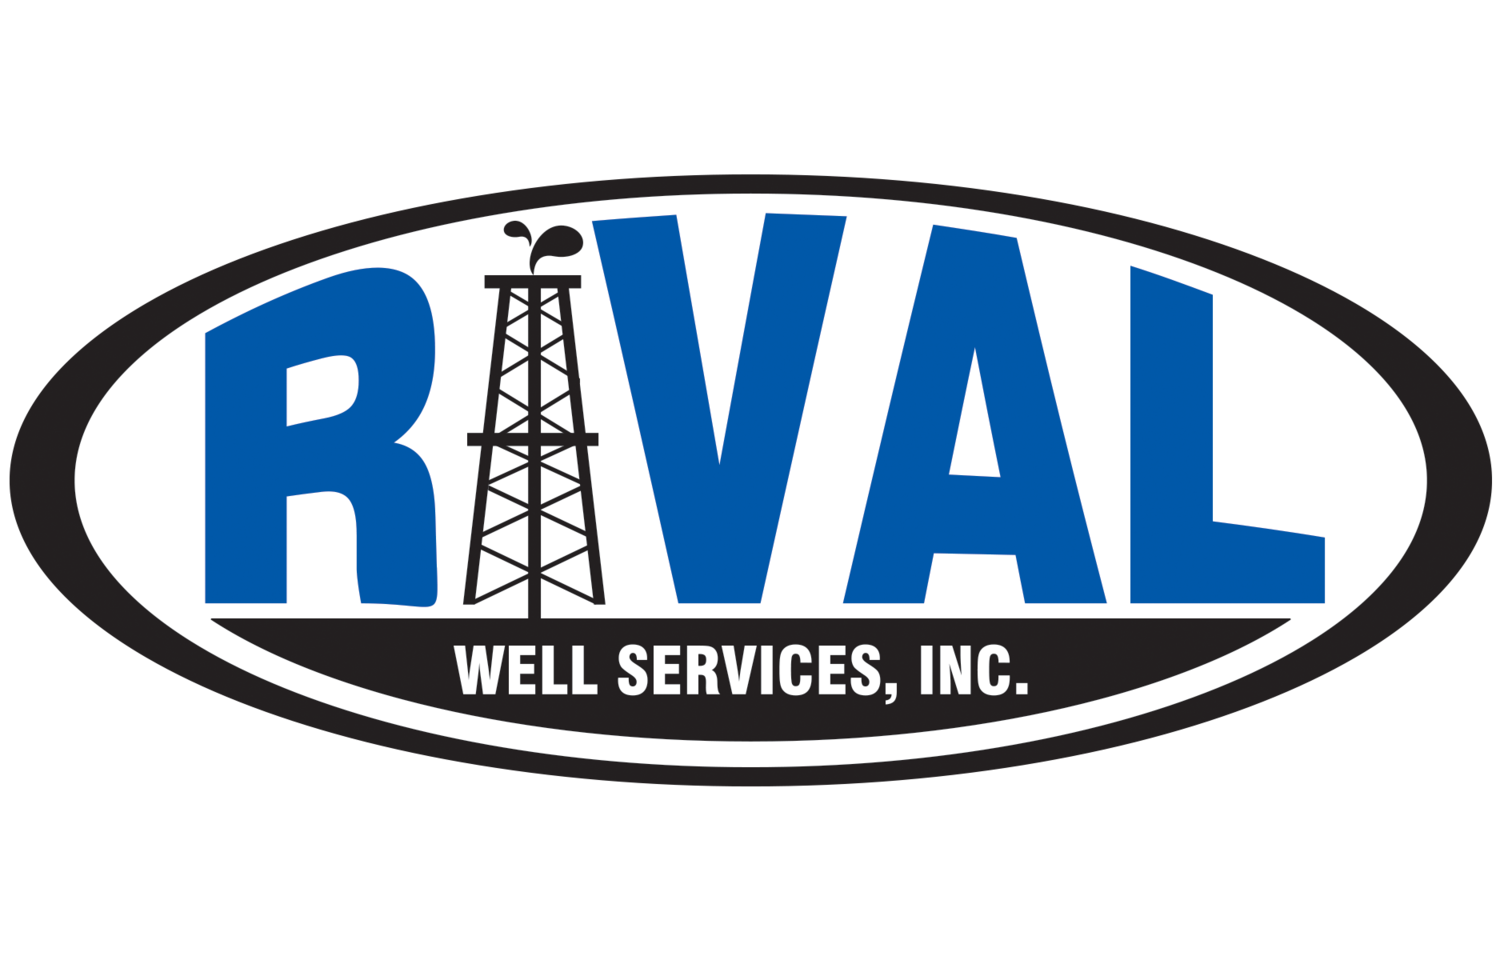 Rival Well Services